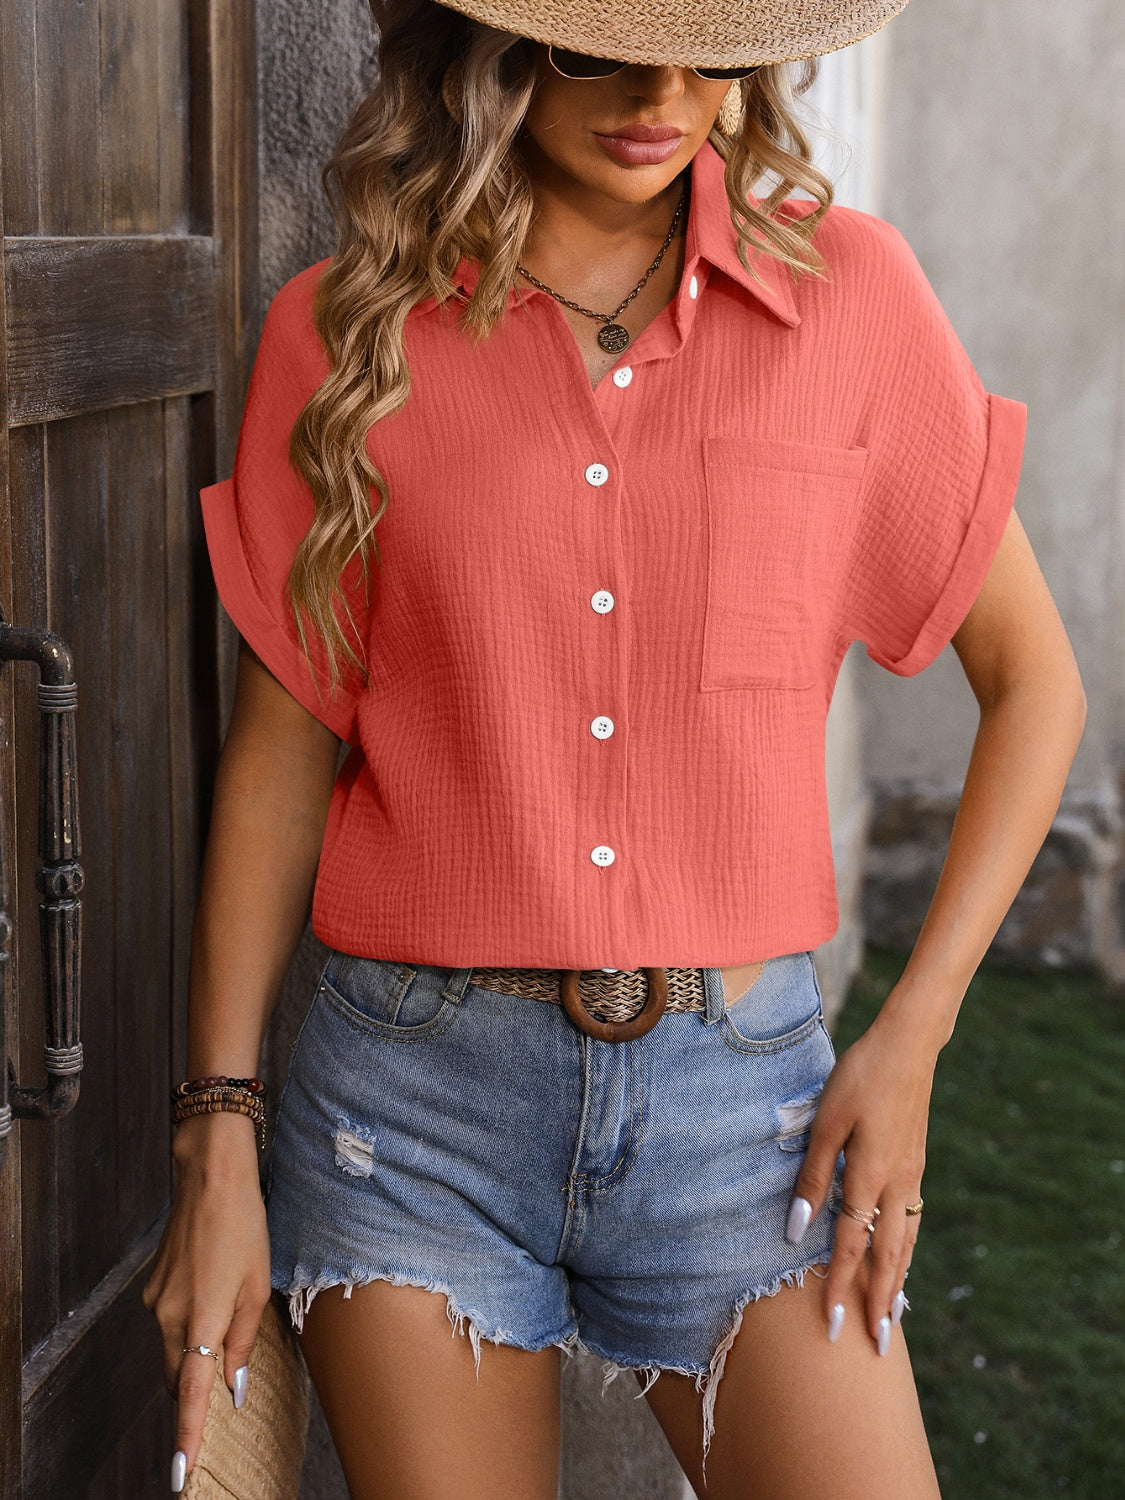 Textured Pocketed Button Up Shirt (6 Colors) Shirts & Tops Krazy Heart Designs Boutique   